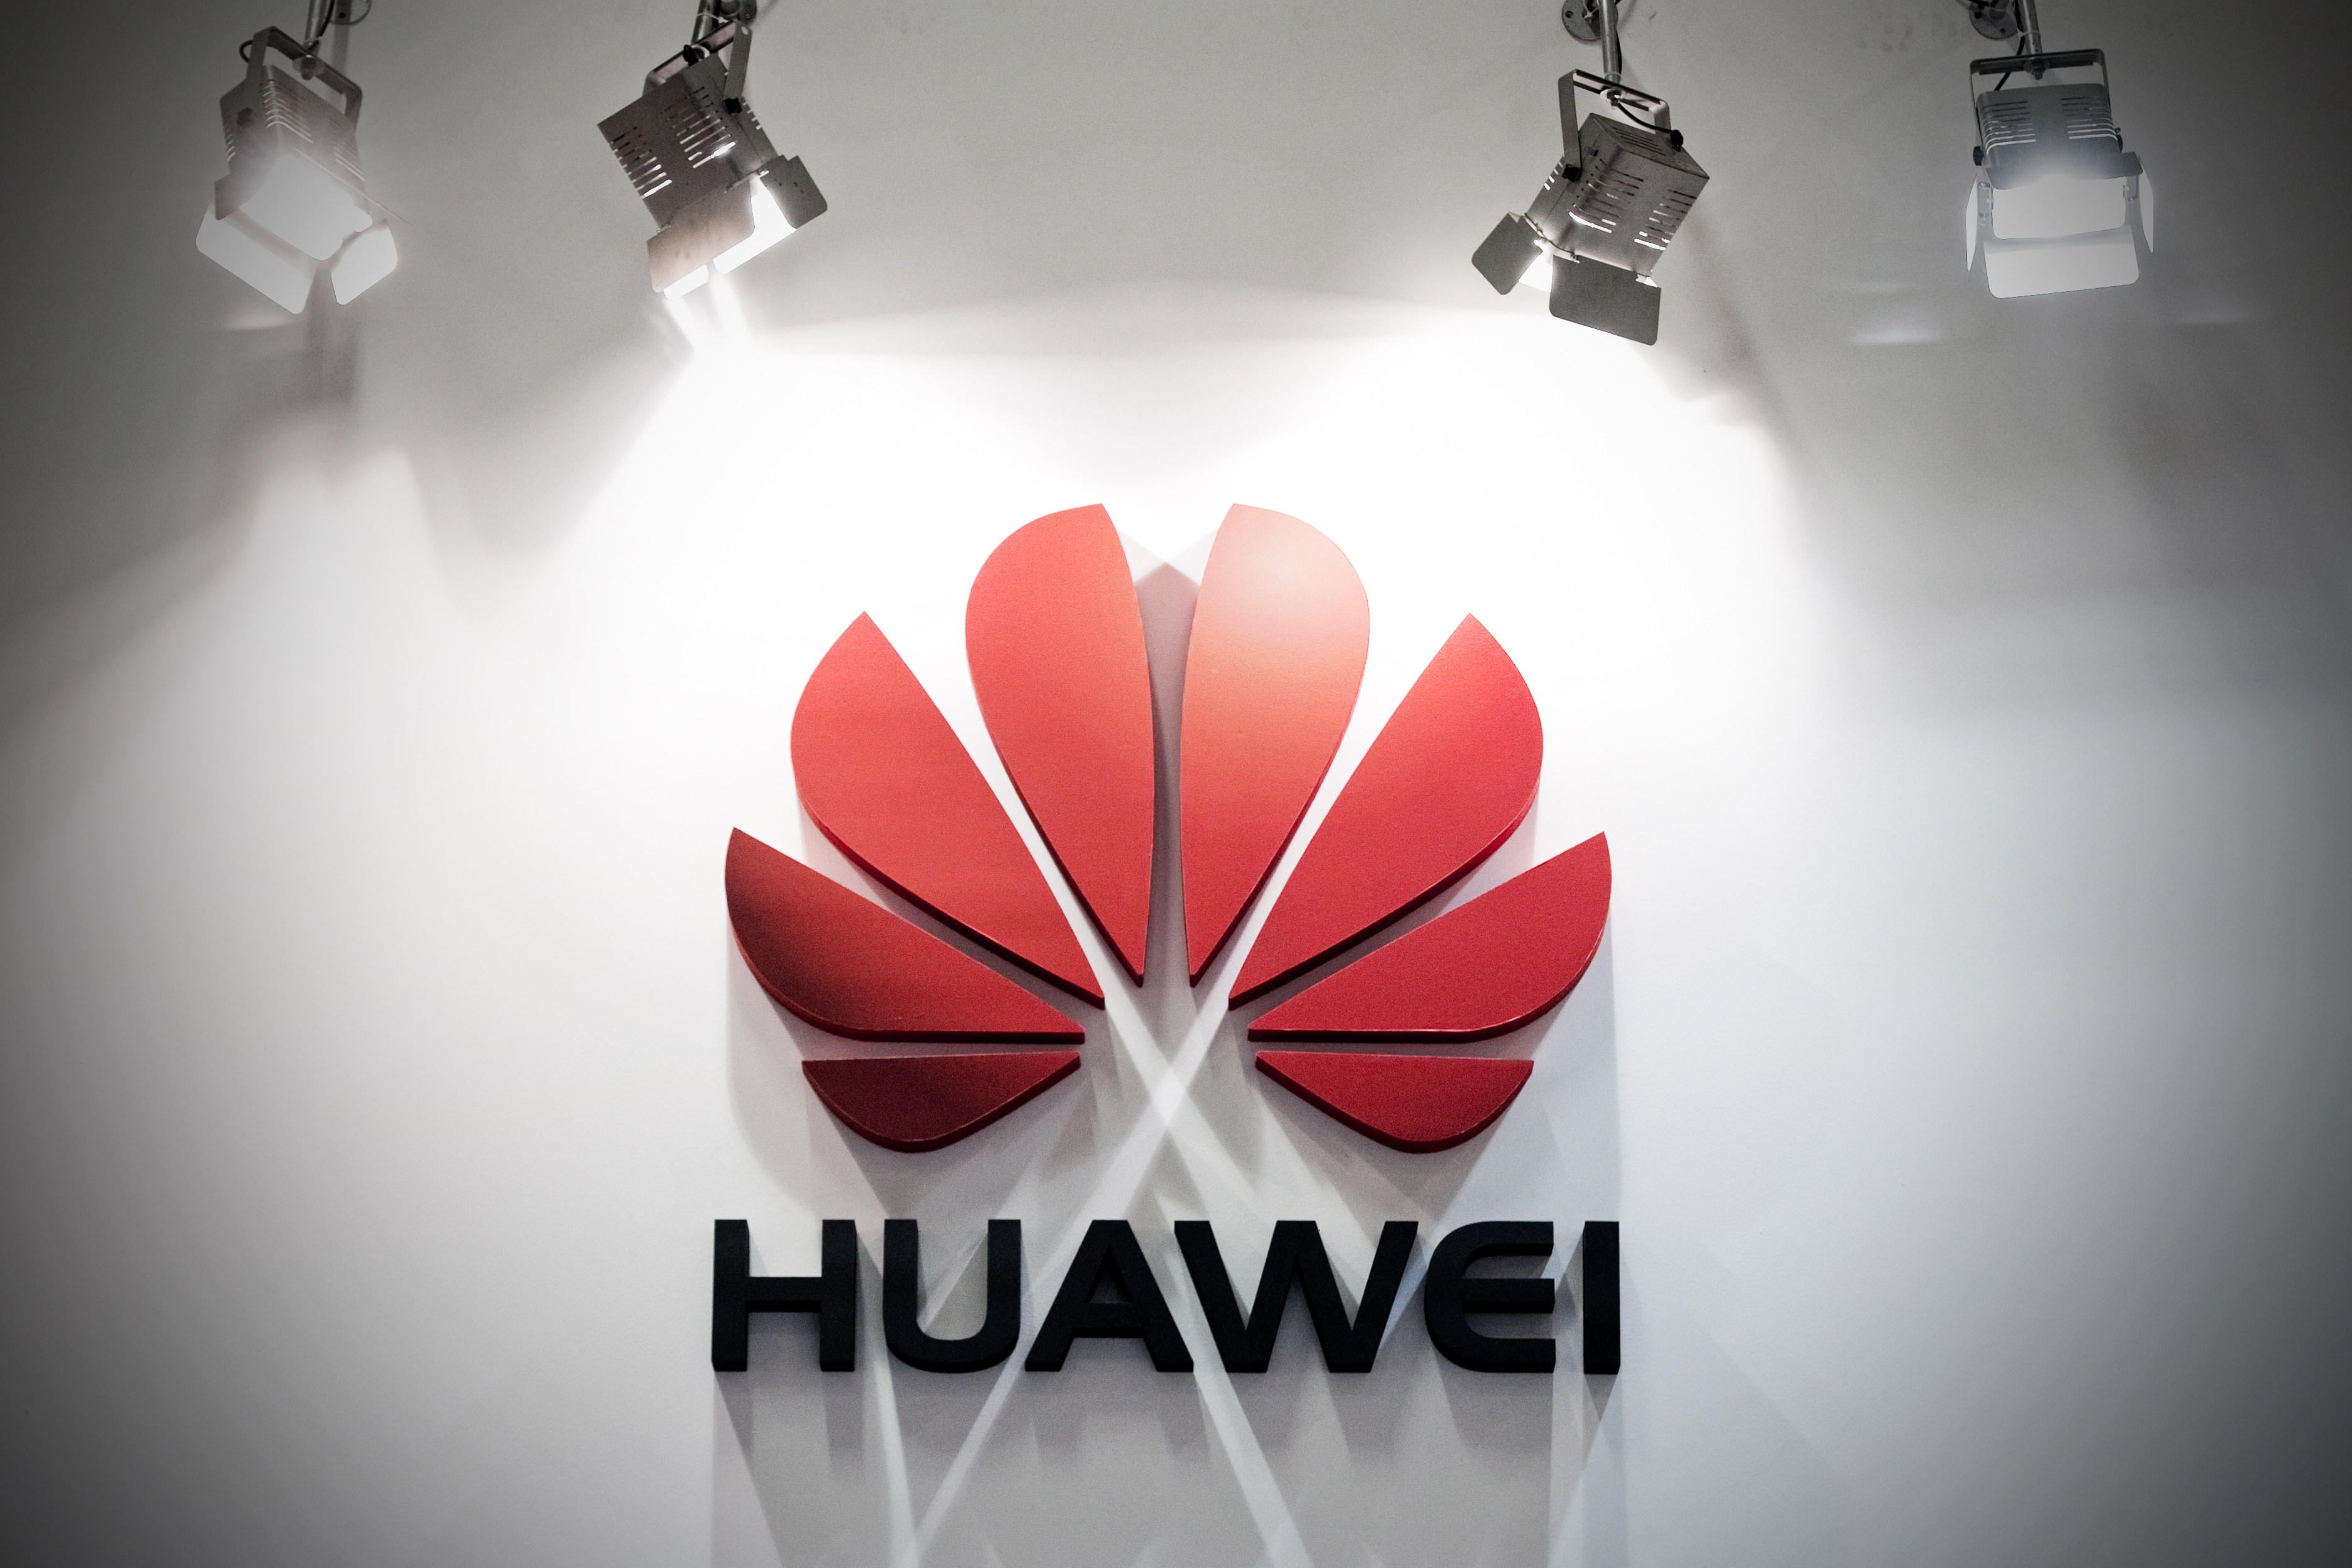 Huawei Technologies' logo is seen at the International Consumer Electronics Fair in Berlin, Germany. Photo: ZB/dpa